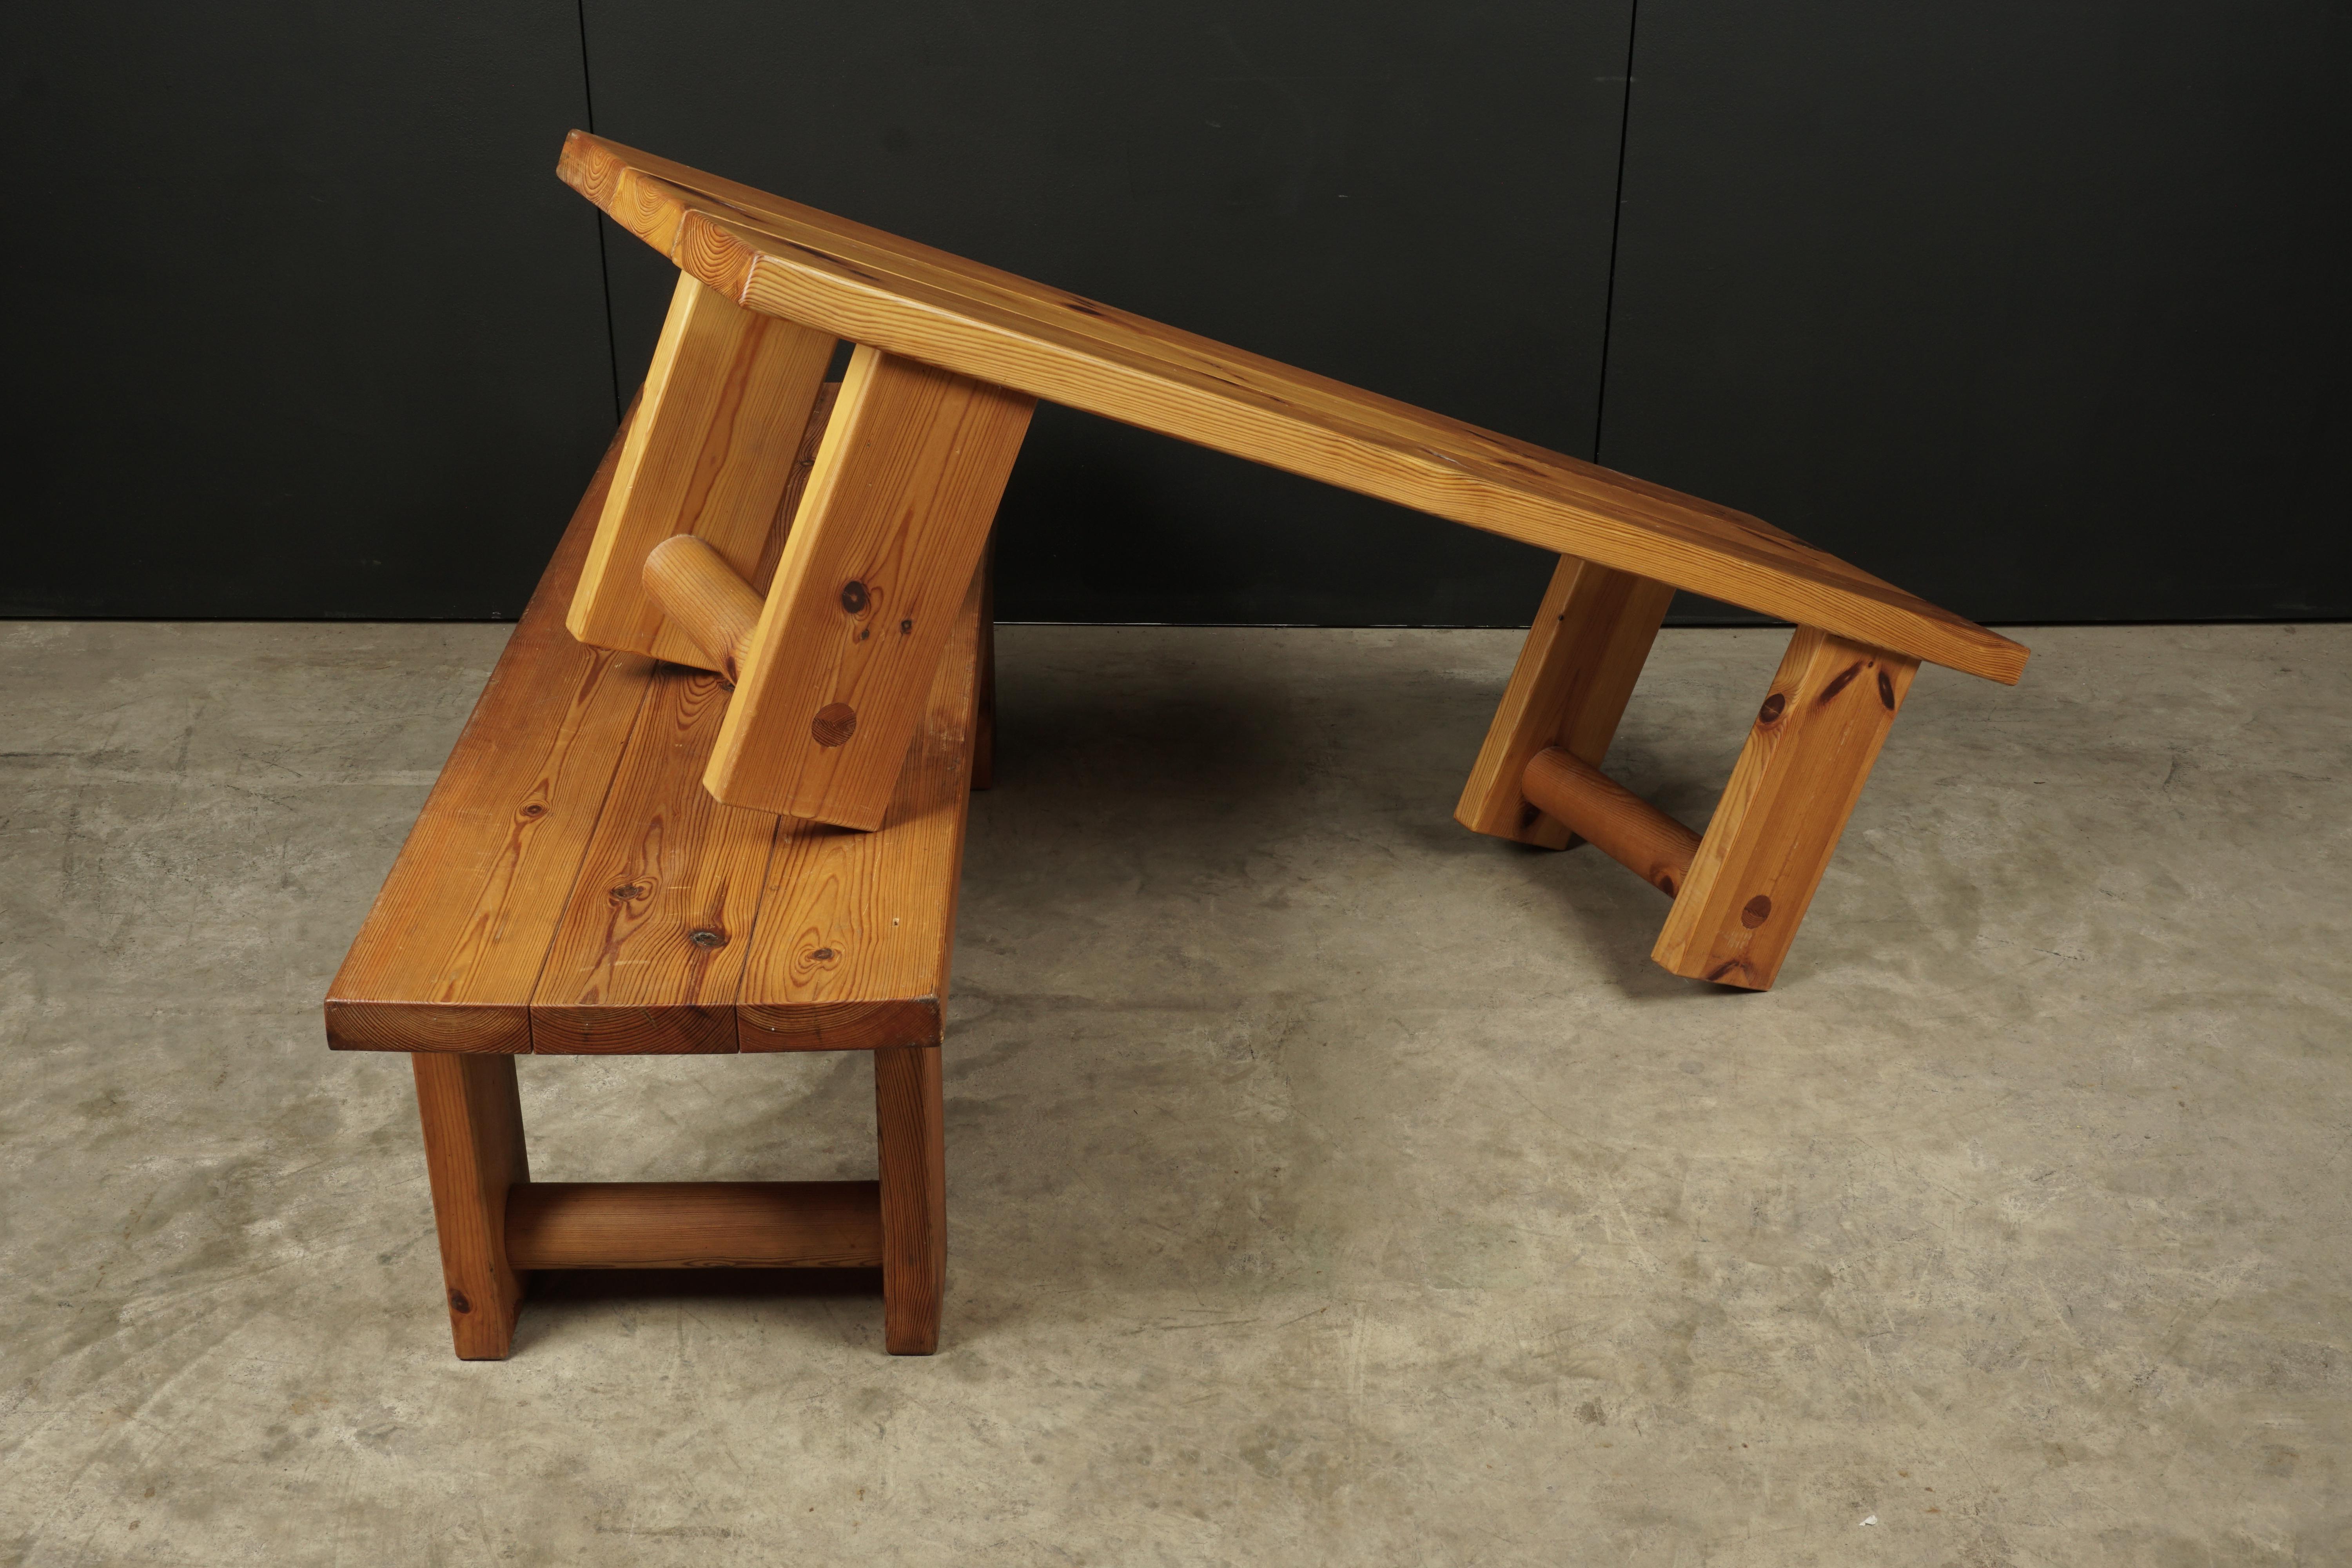 Pair of midcentury solid pine benches from Sweden, circa 1970. Solid pine construction with light wear and patina.